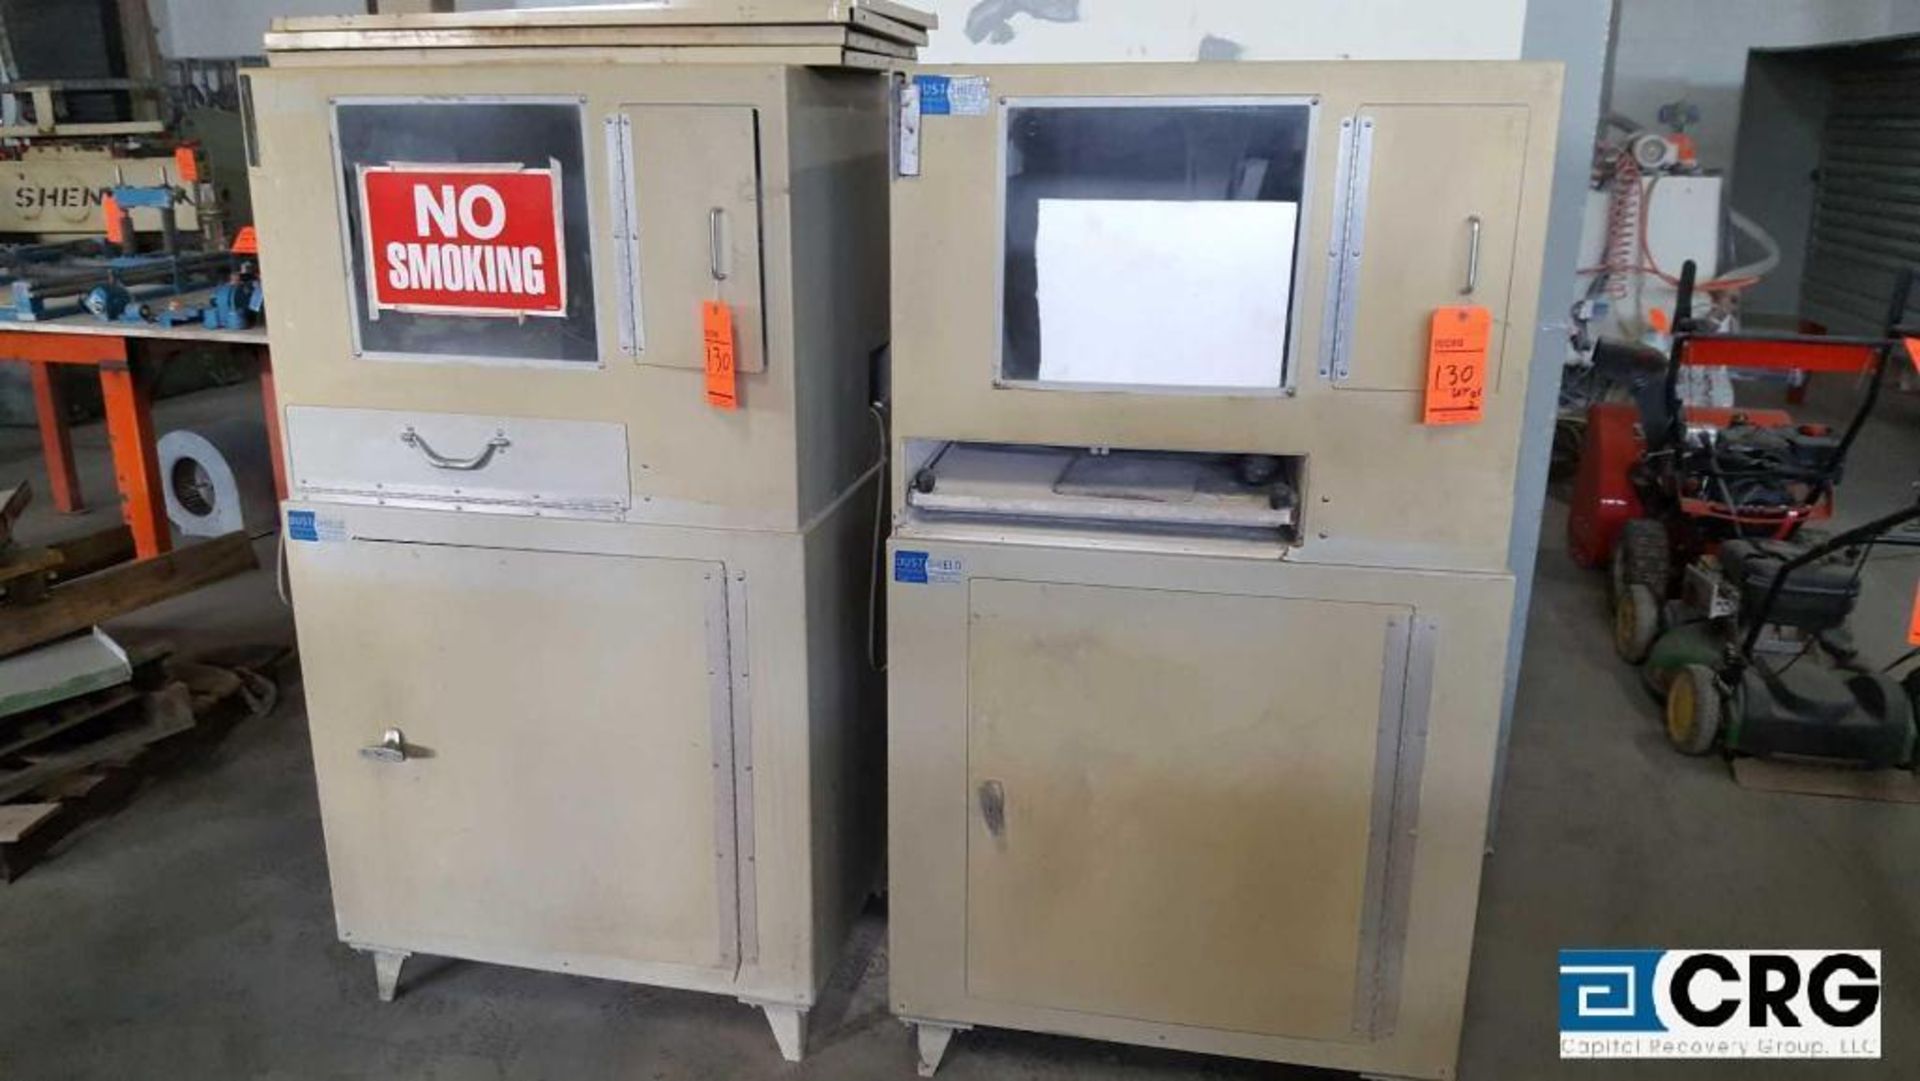 Lot of two assorted clean boxes for computers or printers, Stonequest personnel may load for $10